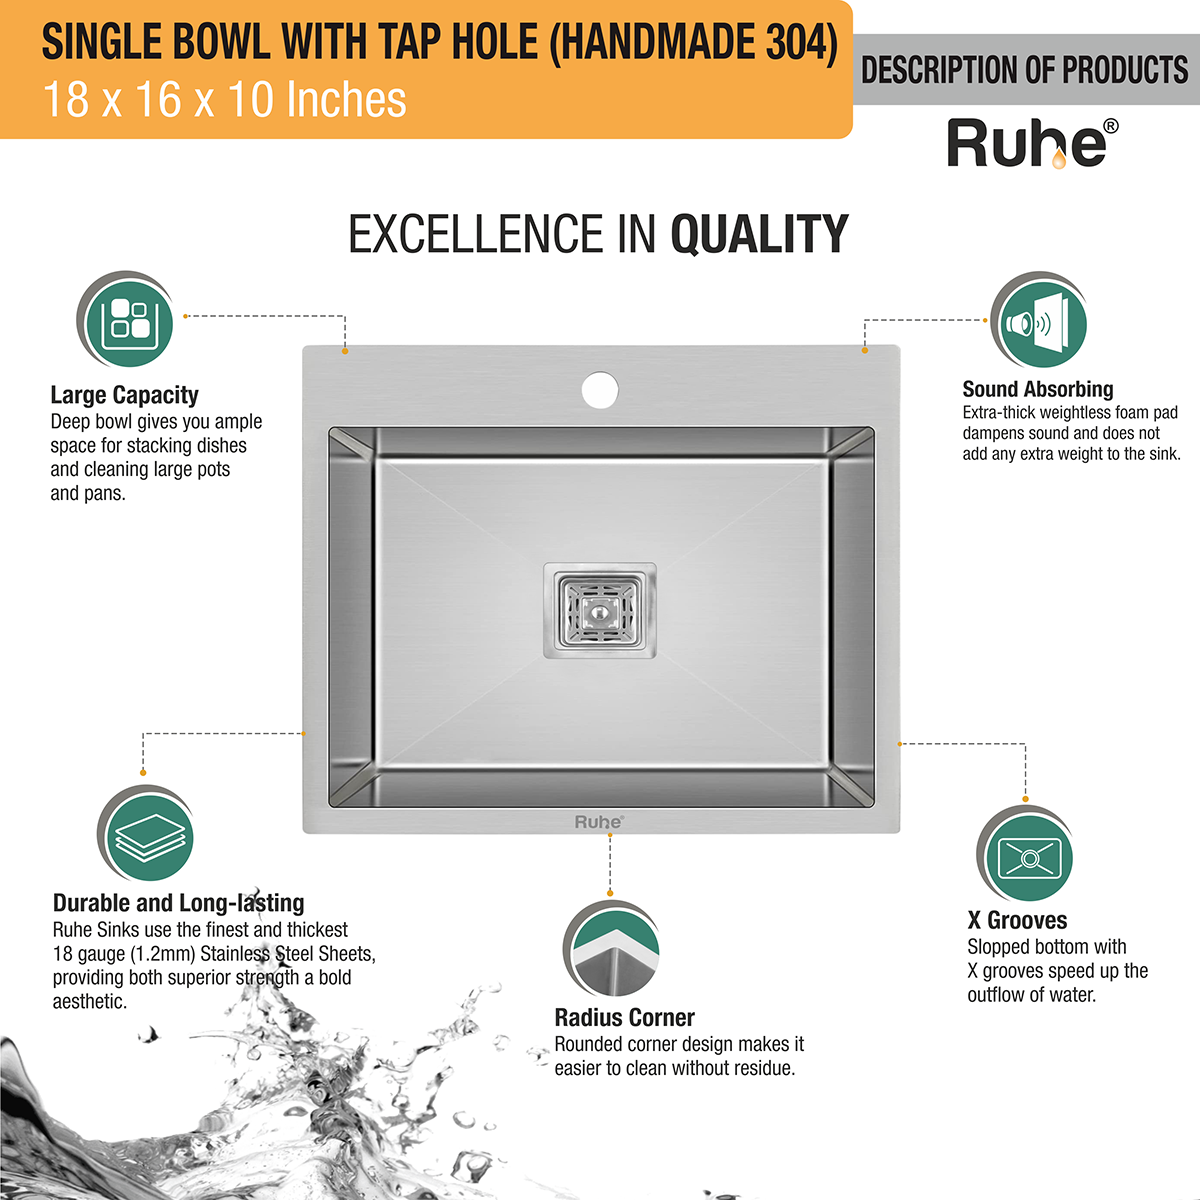 Handmade Single Bowl 304-Grade Kitchen Sink (18 x 16 x 10 Inches) with Tap Hole quality products